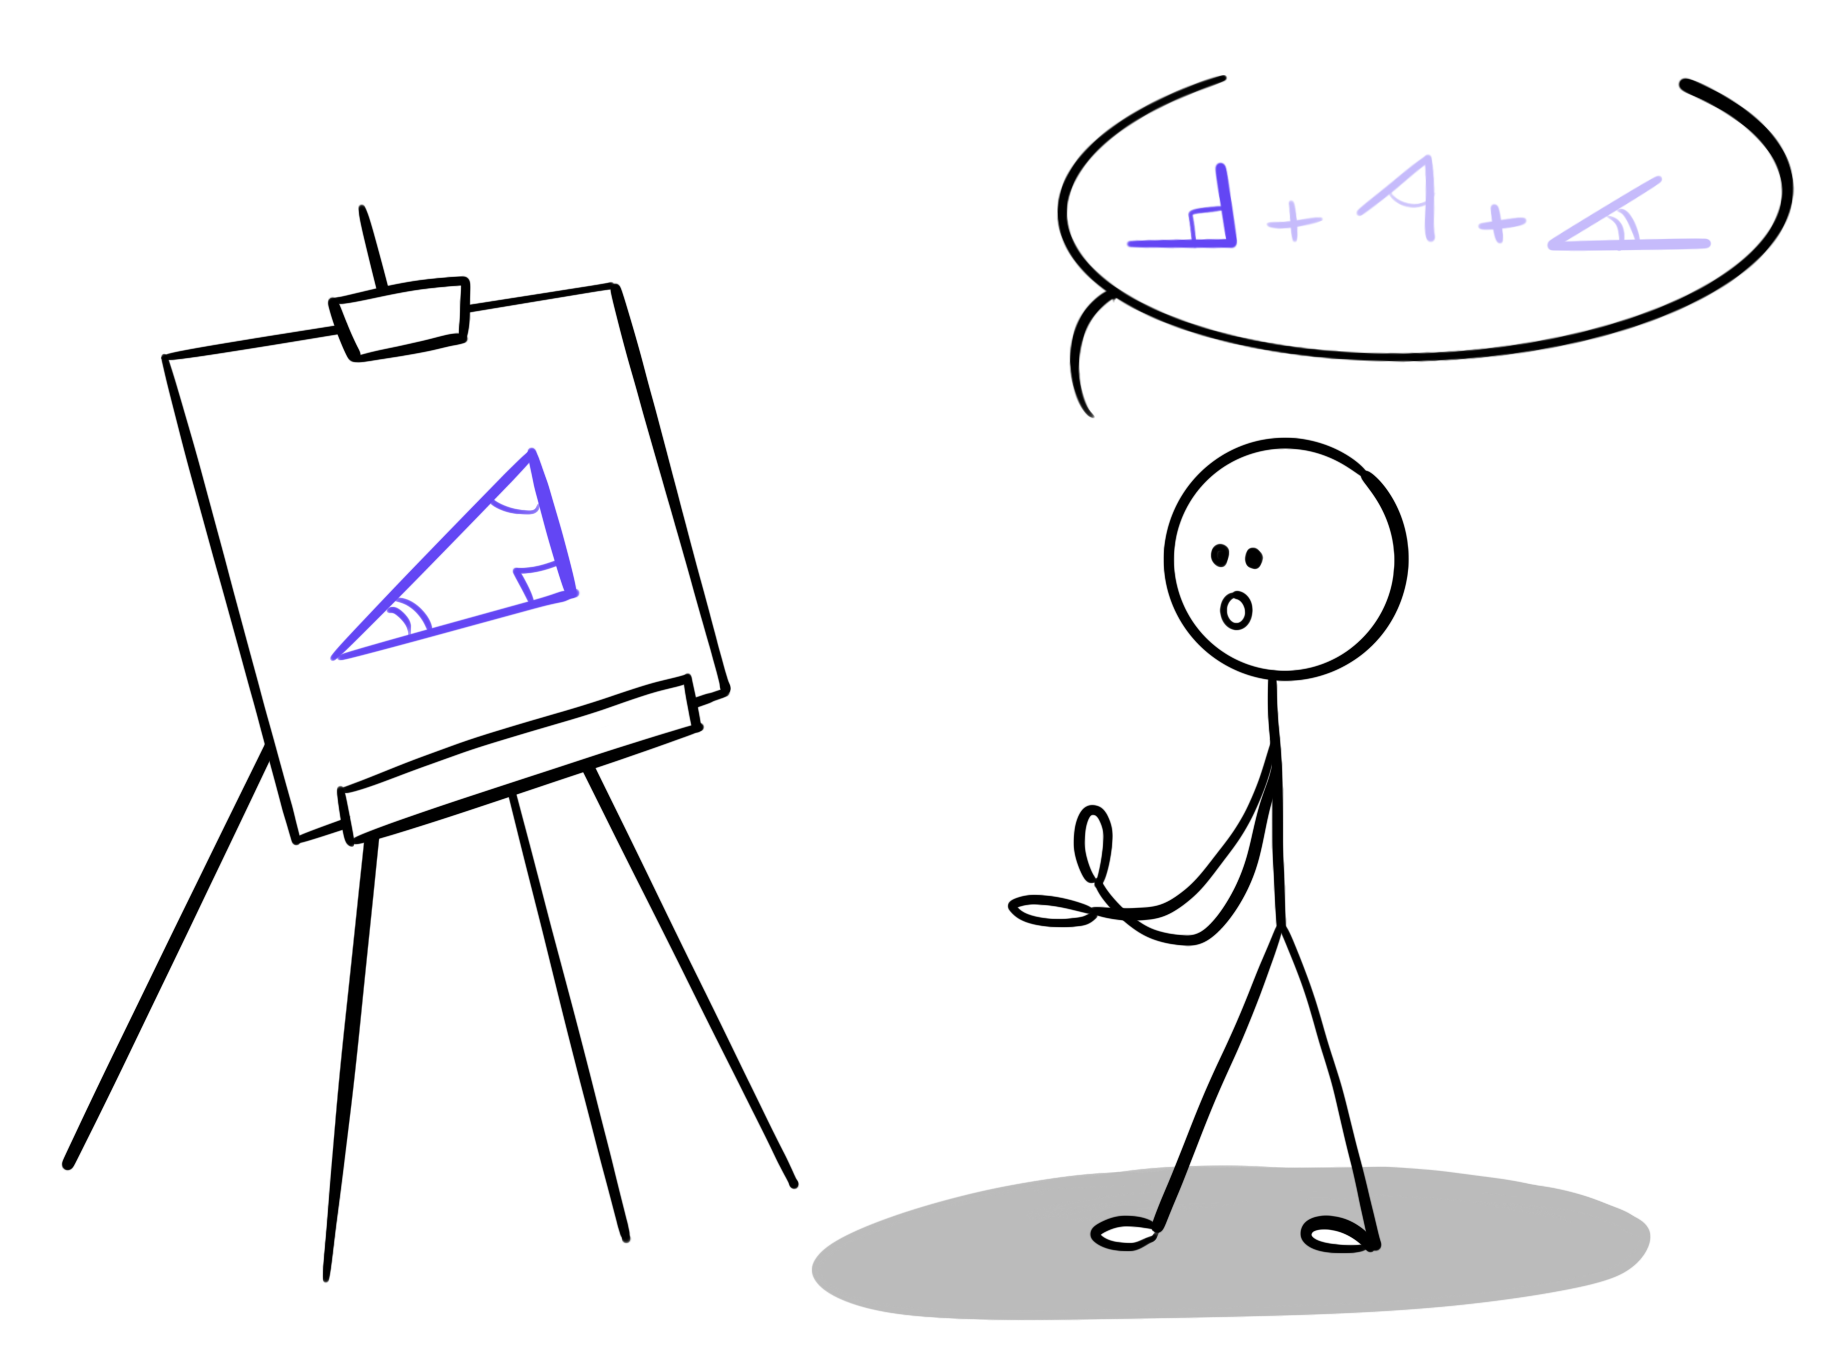 On the left, there is a triangle on a blackboard. On the right, a mathematician is expressing the sum of the angles of the triangle while forming these angles with their hands